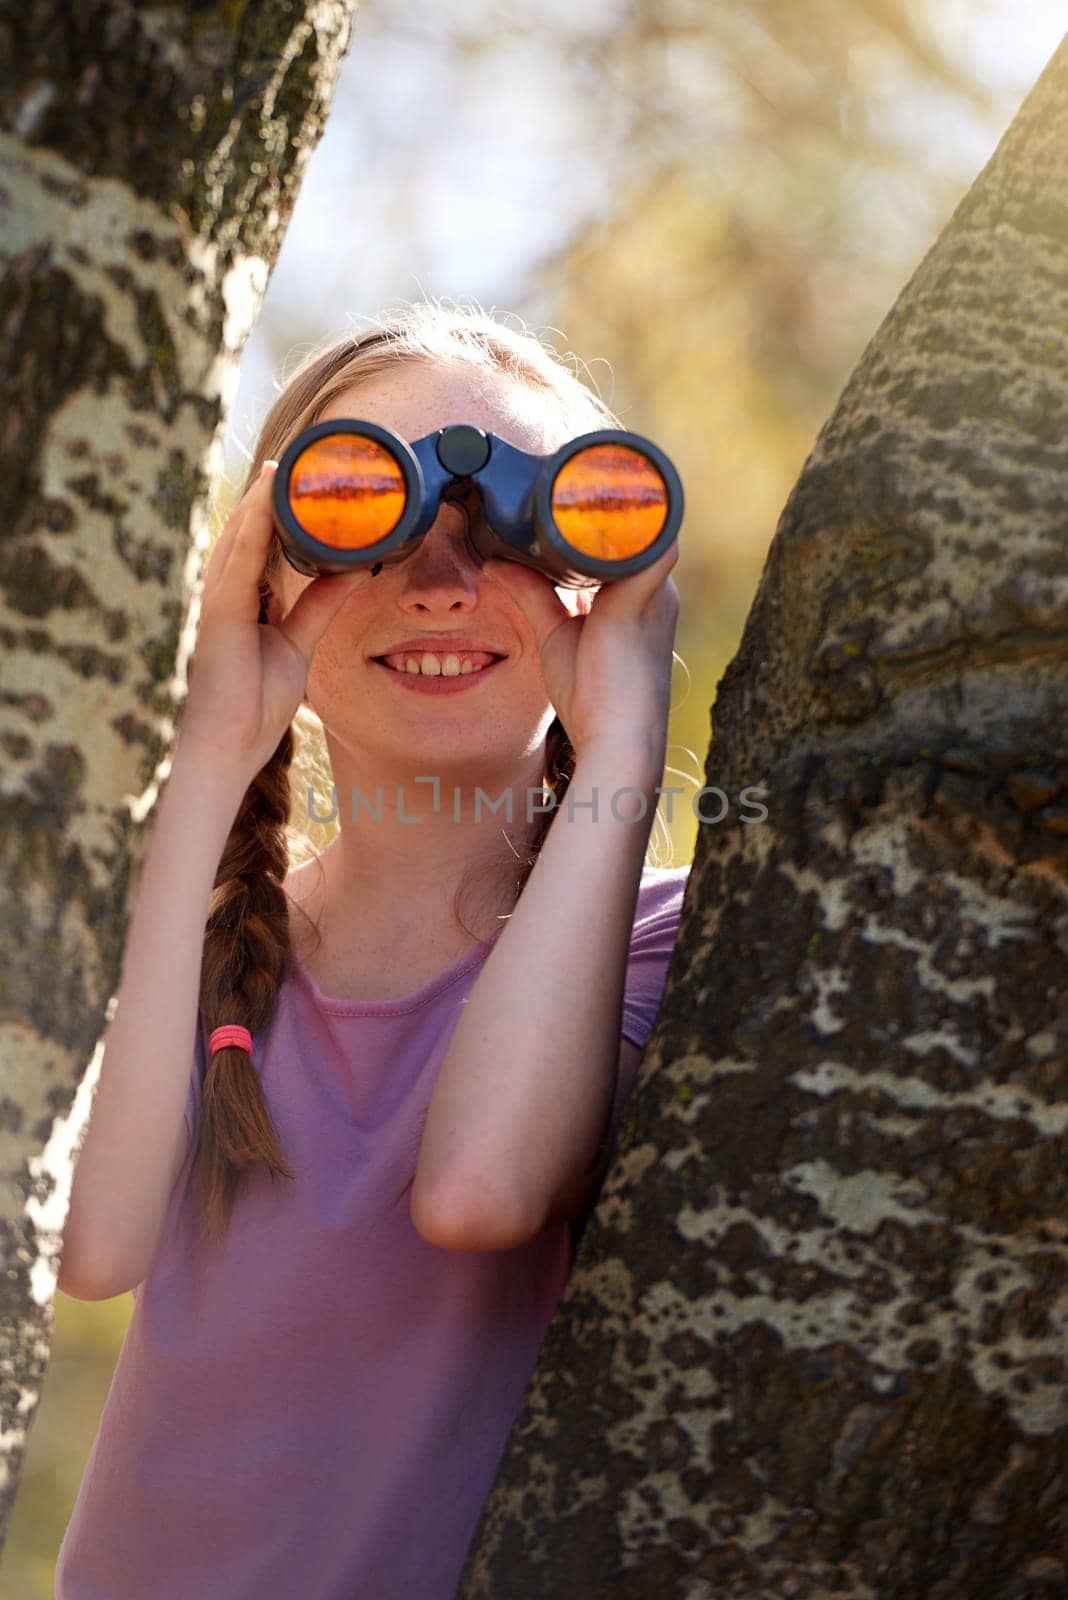 Tree, girl and binoculars for safari, search and looking for animals on travel holiday. Smile, fun and seek for bird watching or wildlife in nature, happy young child and scenery or view in Kenya.